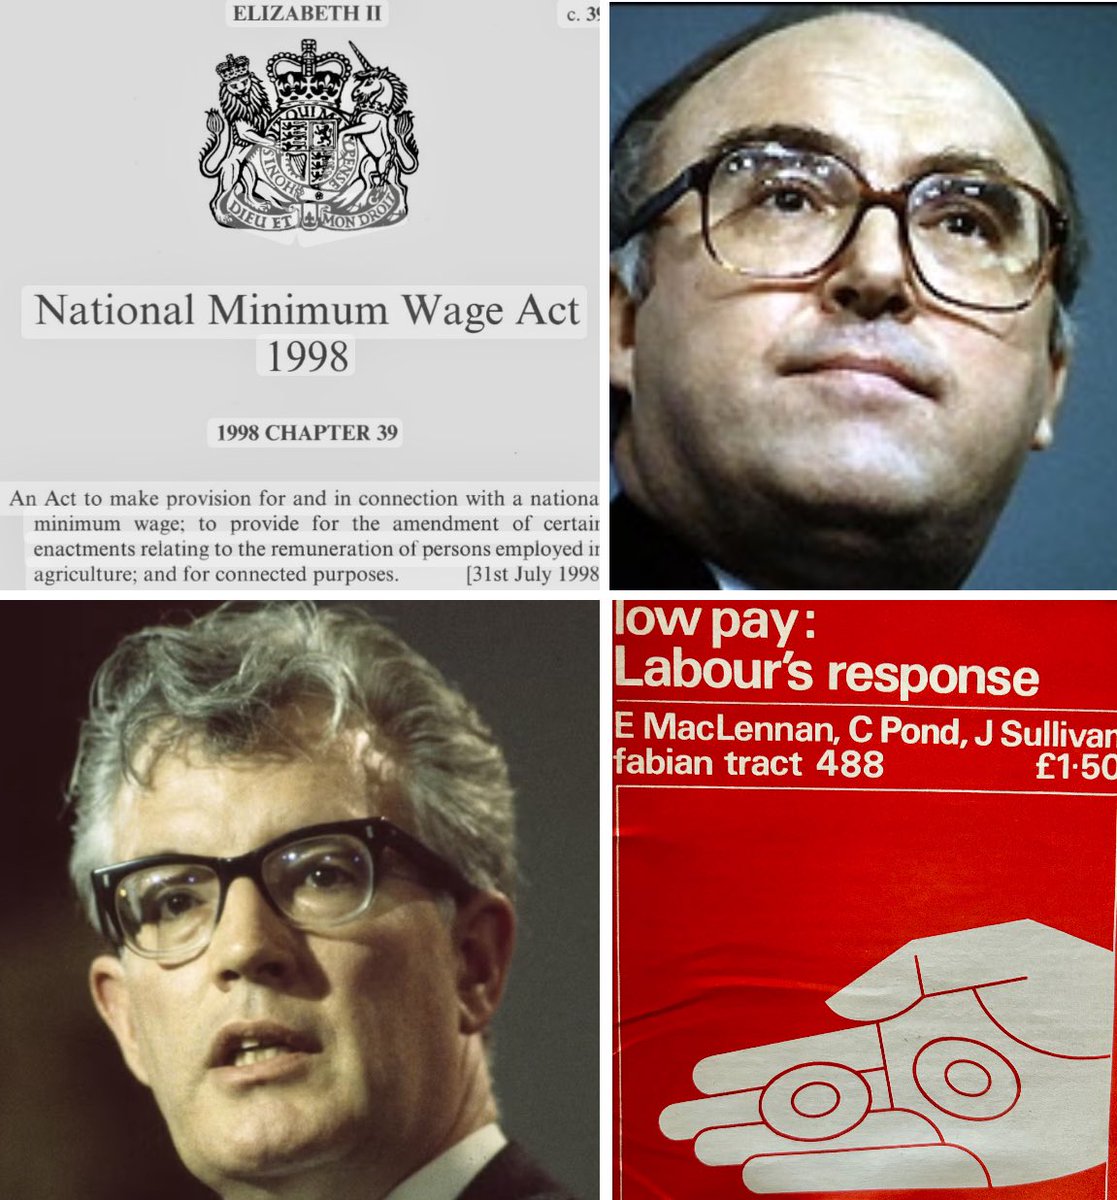 25 years of the UK minimum wage. We’re proud of the work our members and union did to help win a statutory minimum wage for working people, significantly reducing low pay and curbing exploitative employers. In the spirit of those who struggled to make it a reality, we continue